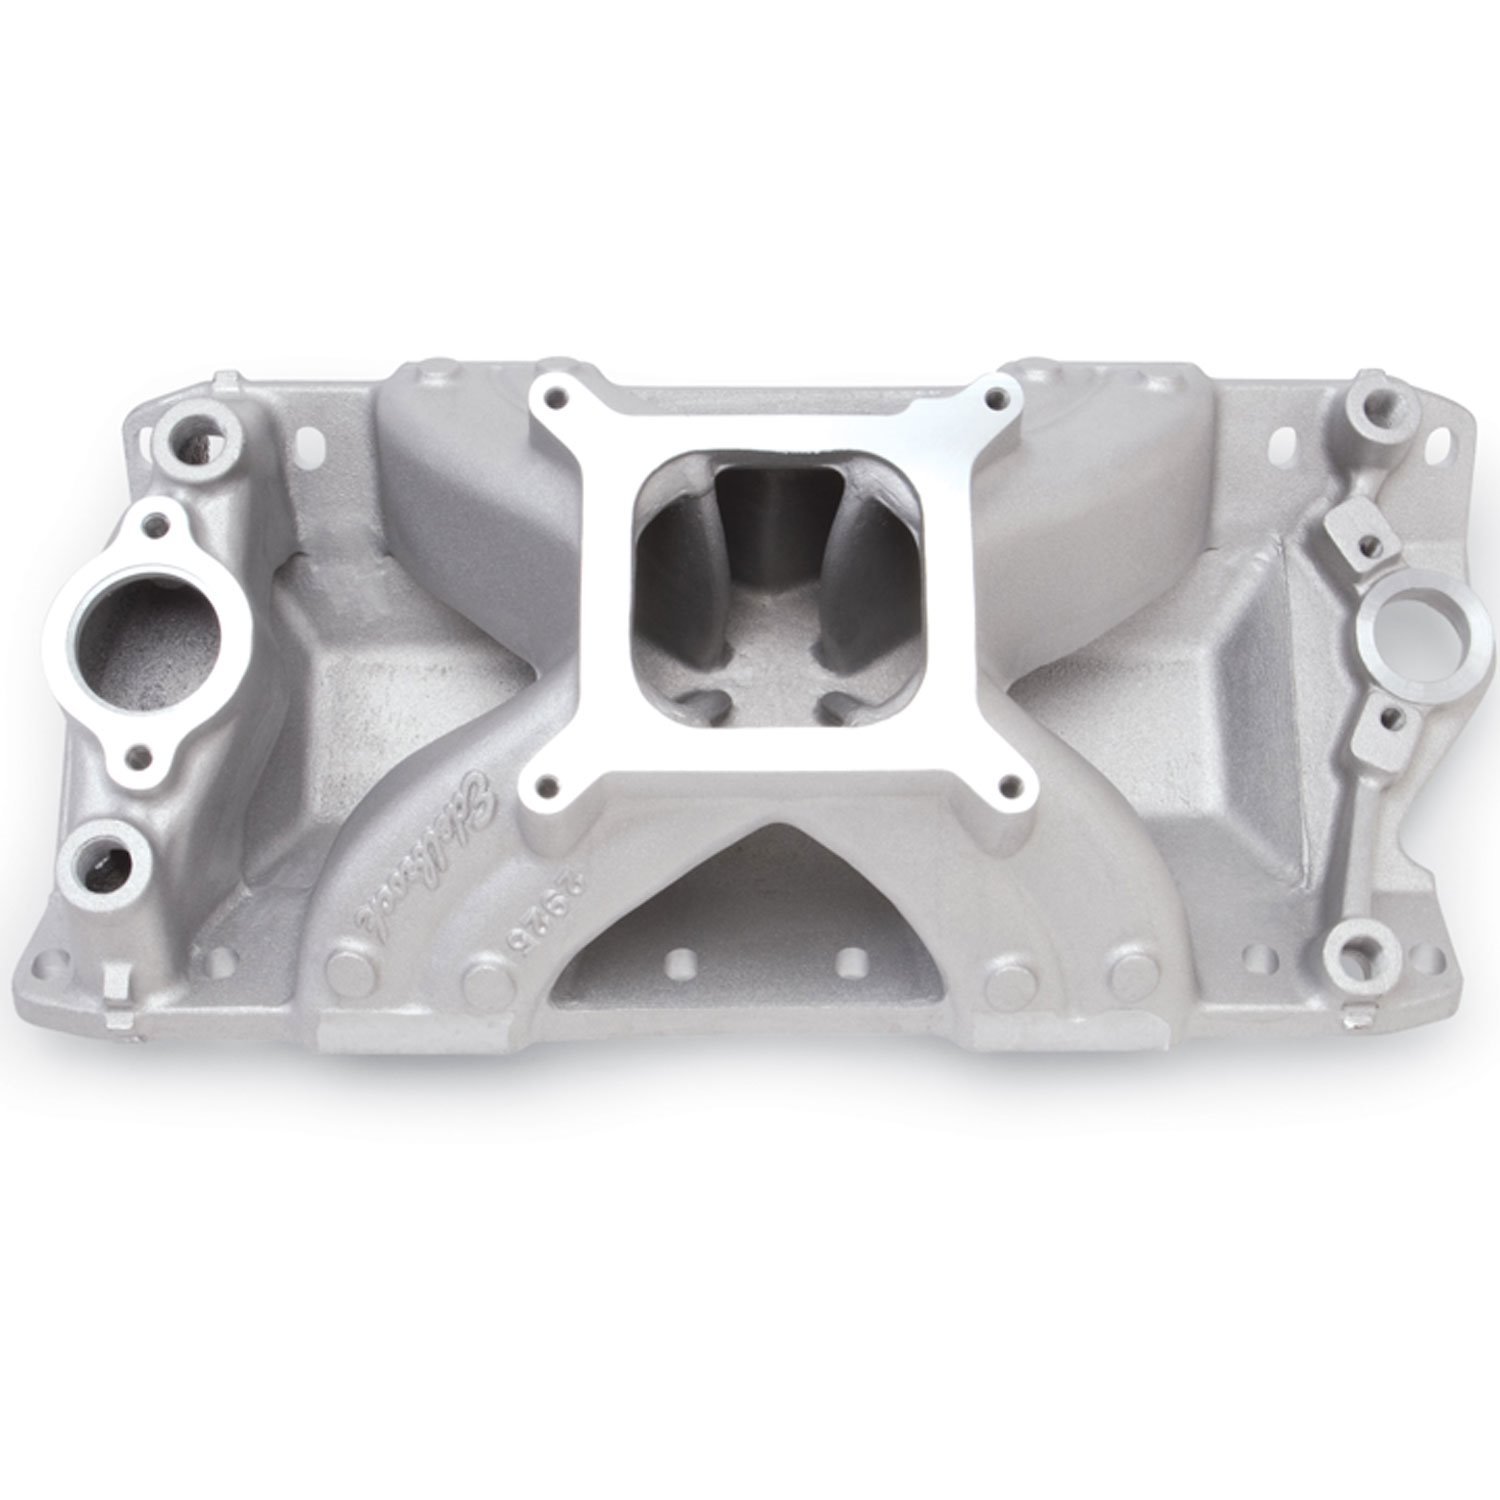 Super Victor Intake Manifold for Small Block Chevy